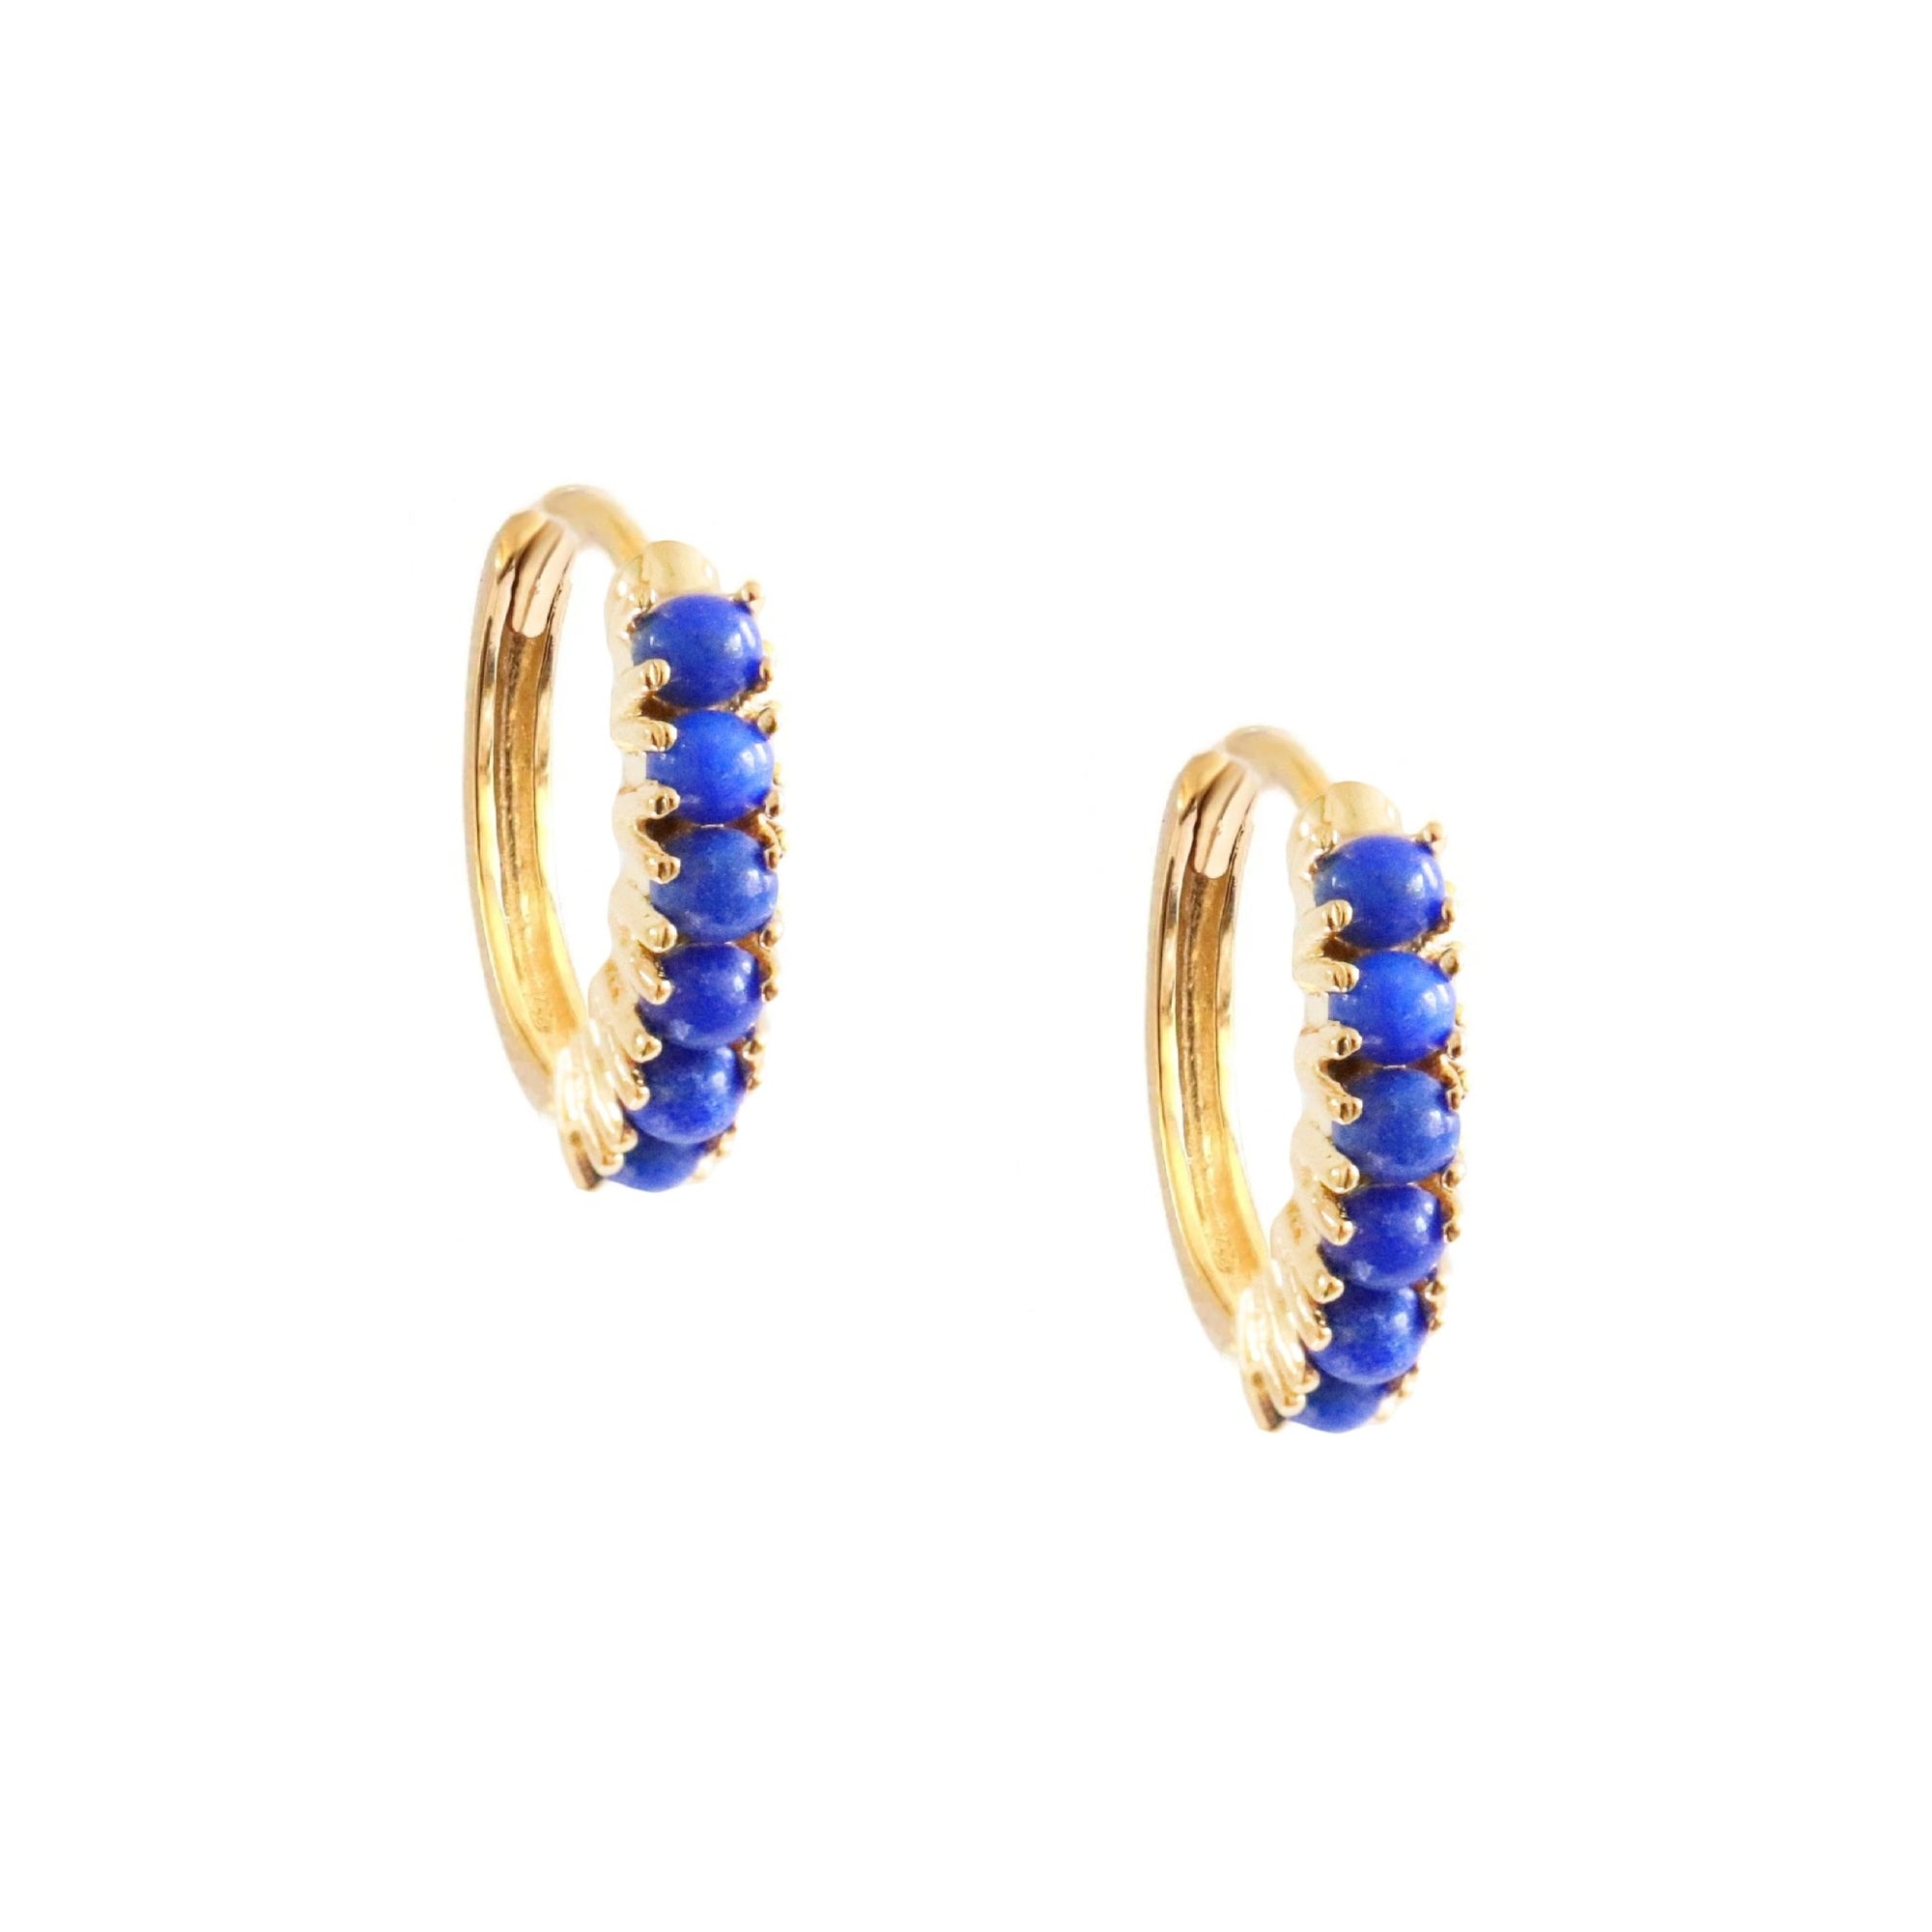 GLEE HUGGIE HOOPS - LAPIS & GOLD - SO PRETTY CARA COTTER